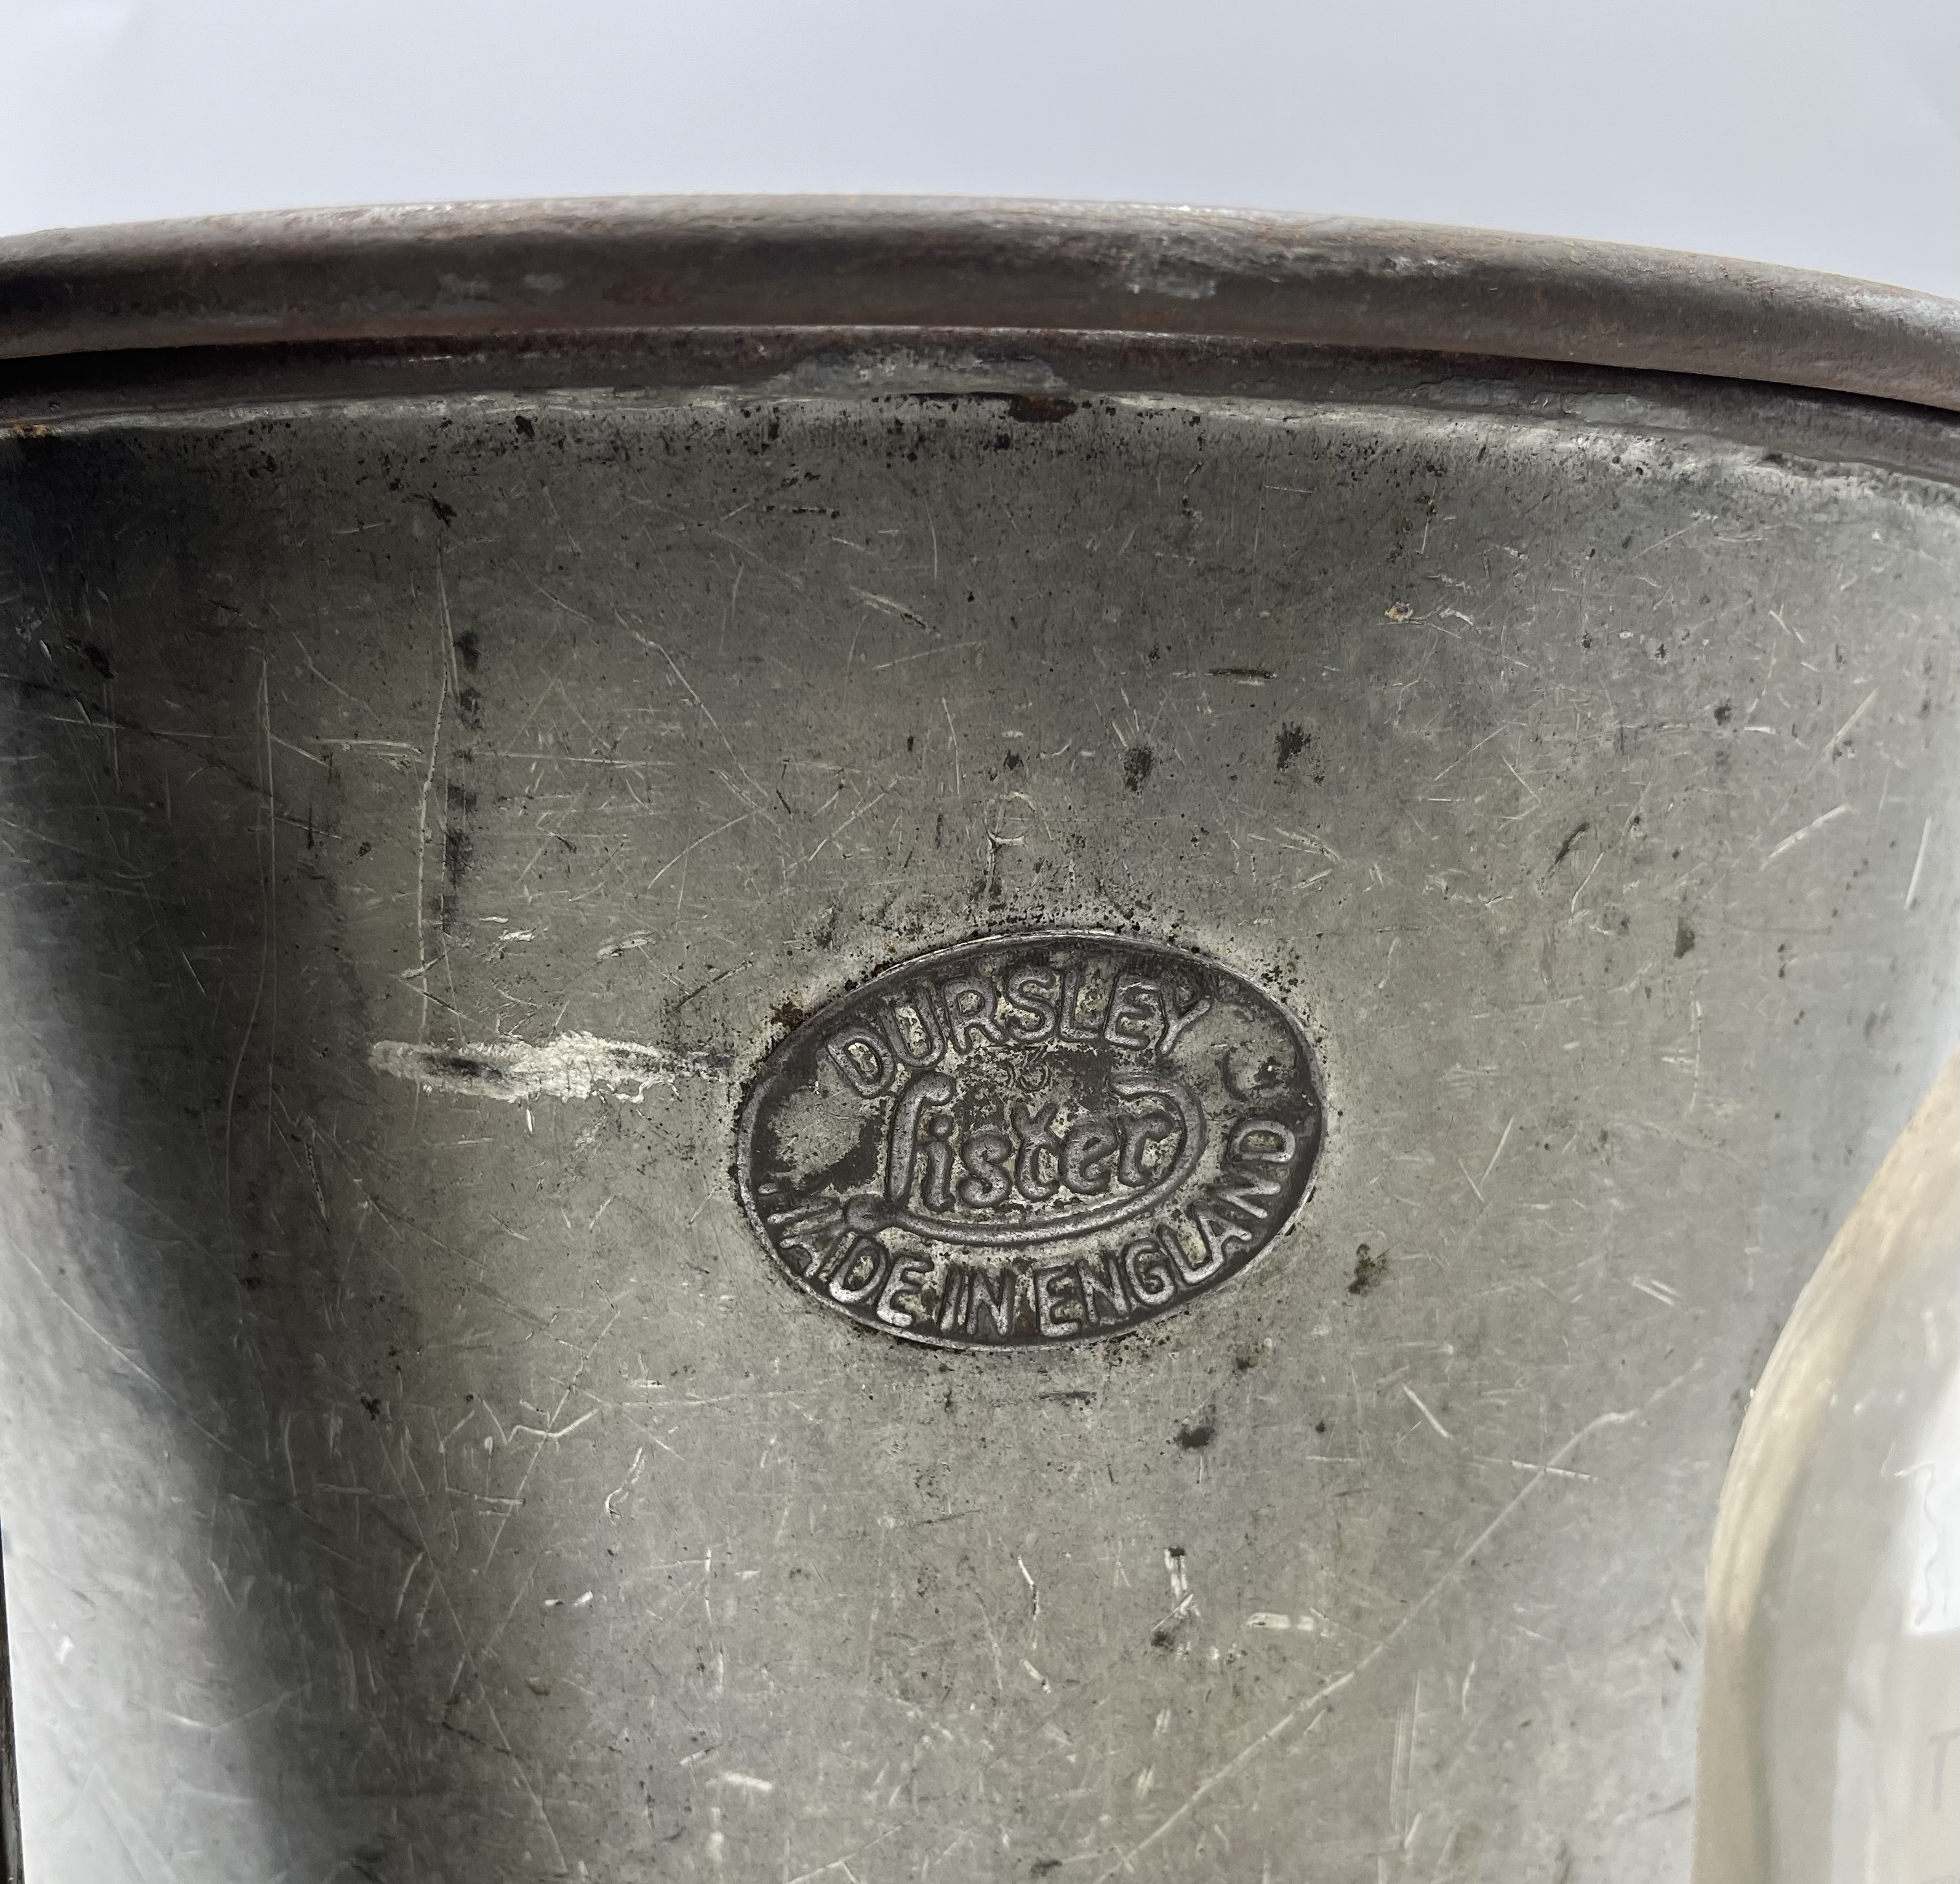 A galvanised Lister bucket along with a Castrol Motor Oil bottle and an Esso lube bottle. - Image 7 of 8